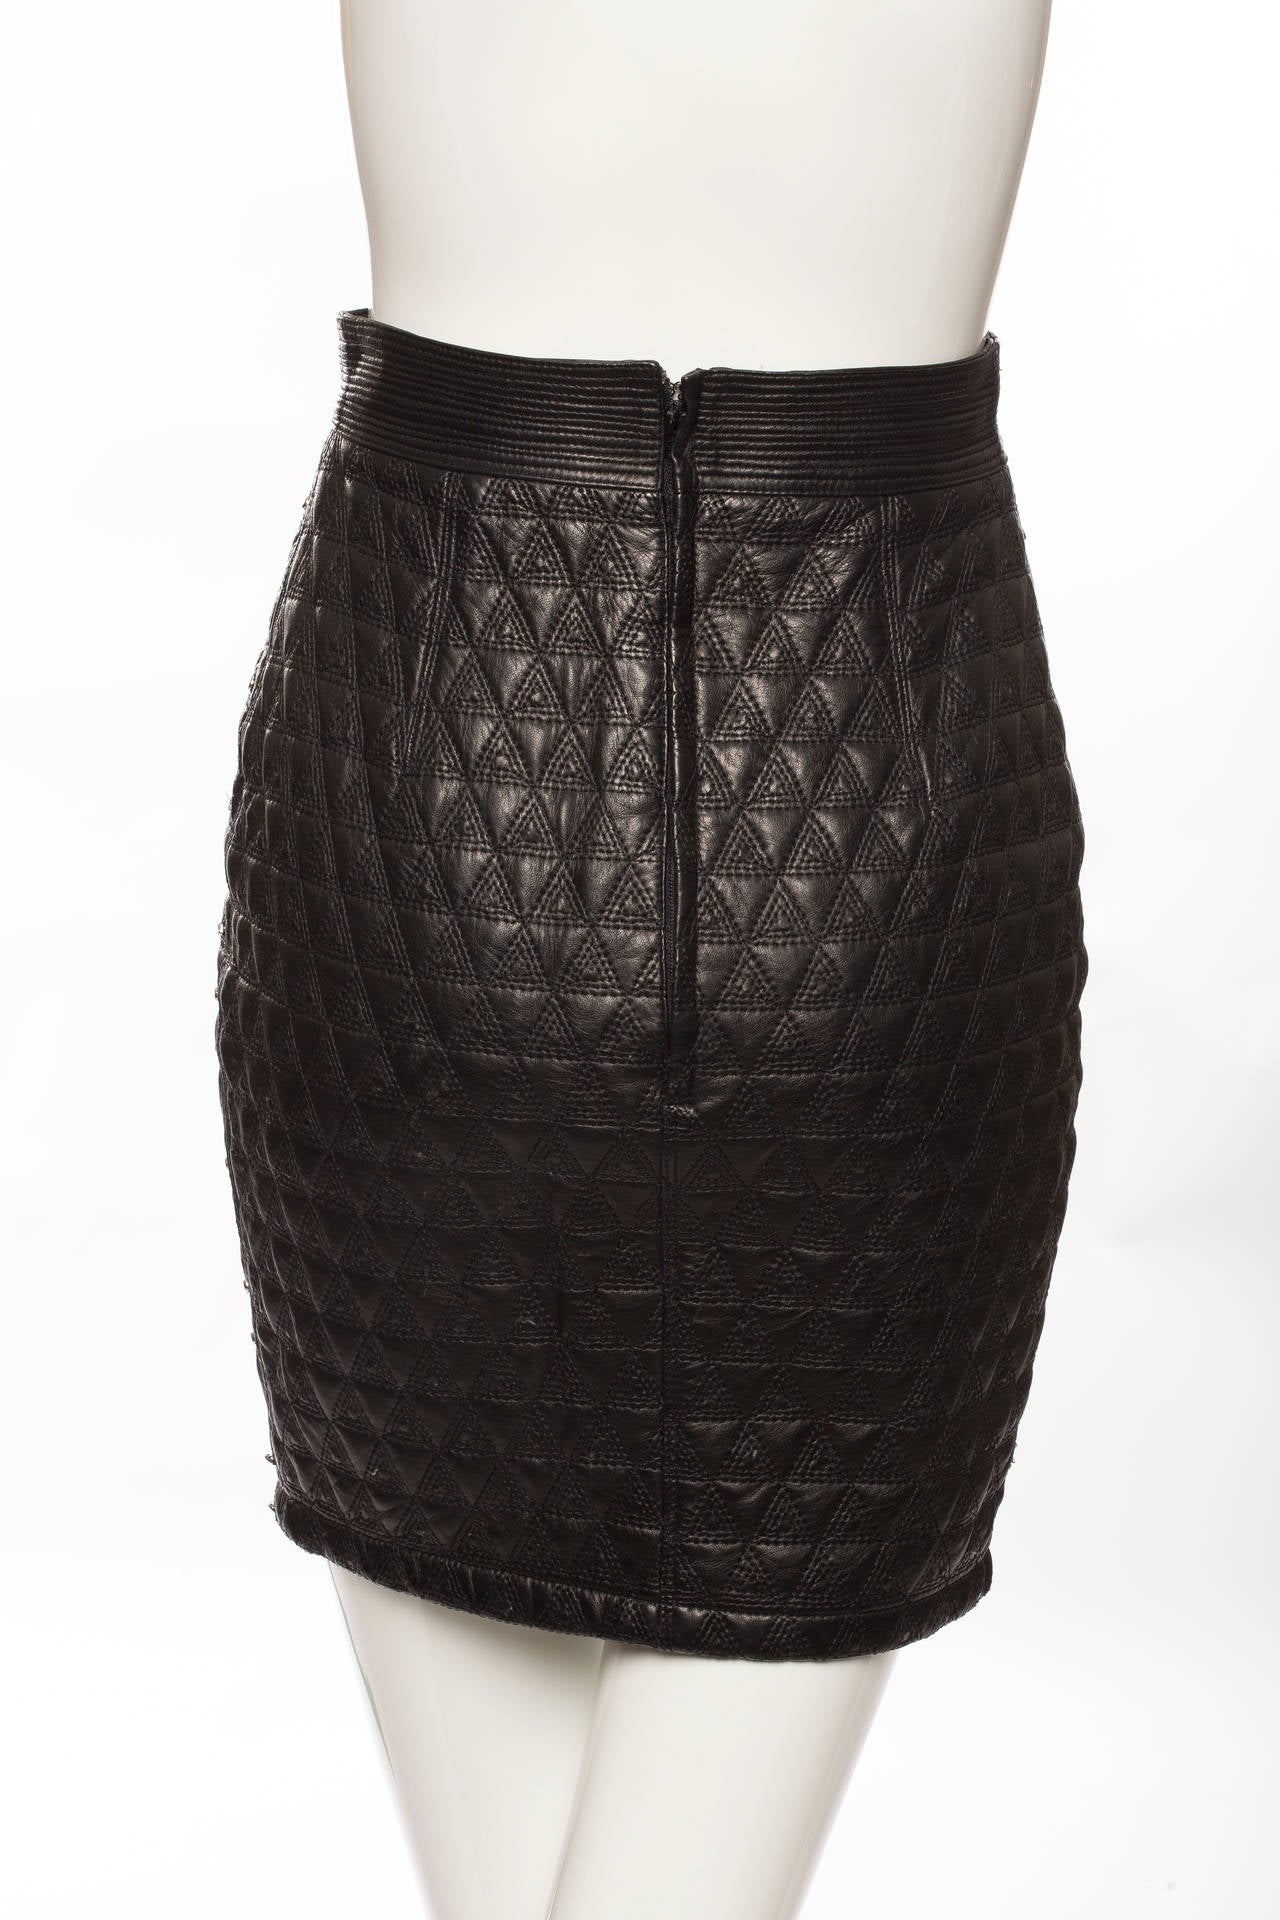 Versace Black Quilted Leather Skirt With Prong Set Crystals, Circa 1990's In Excellent Condition For Sale In Cincinnati, OH